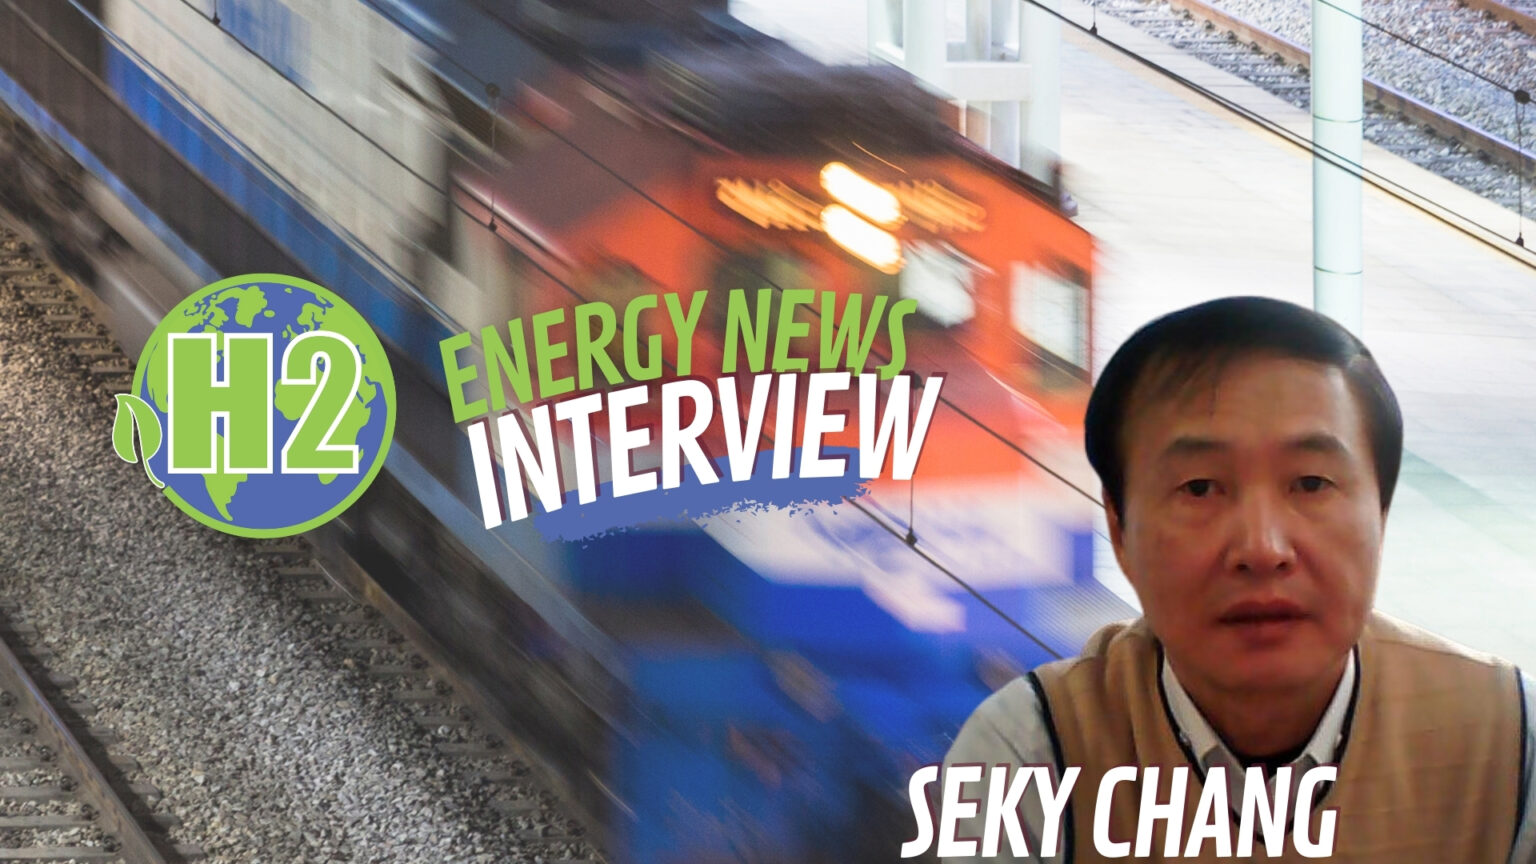 INTERVIEW: Dr. Seky Chang discusses hydrail